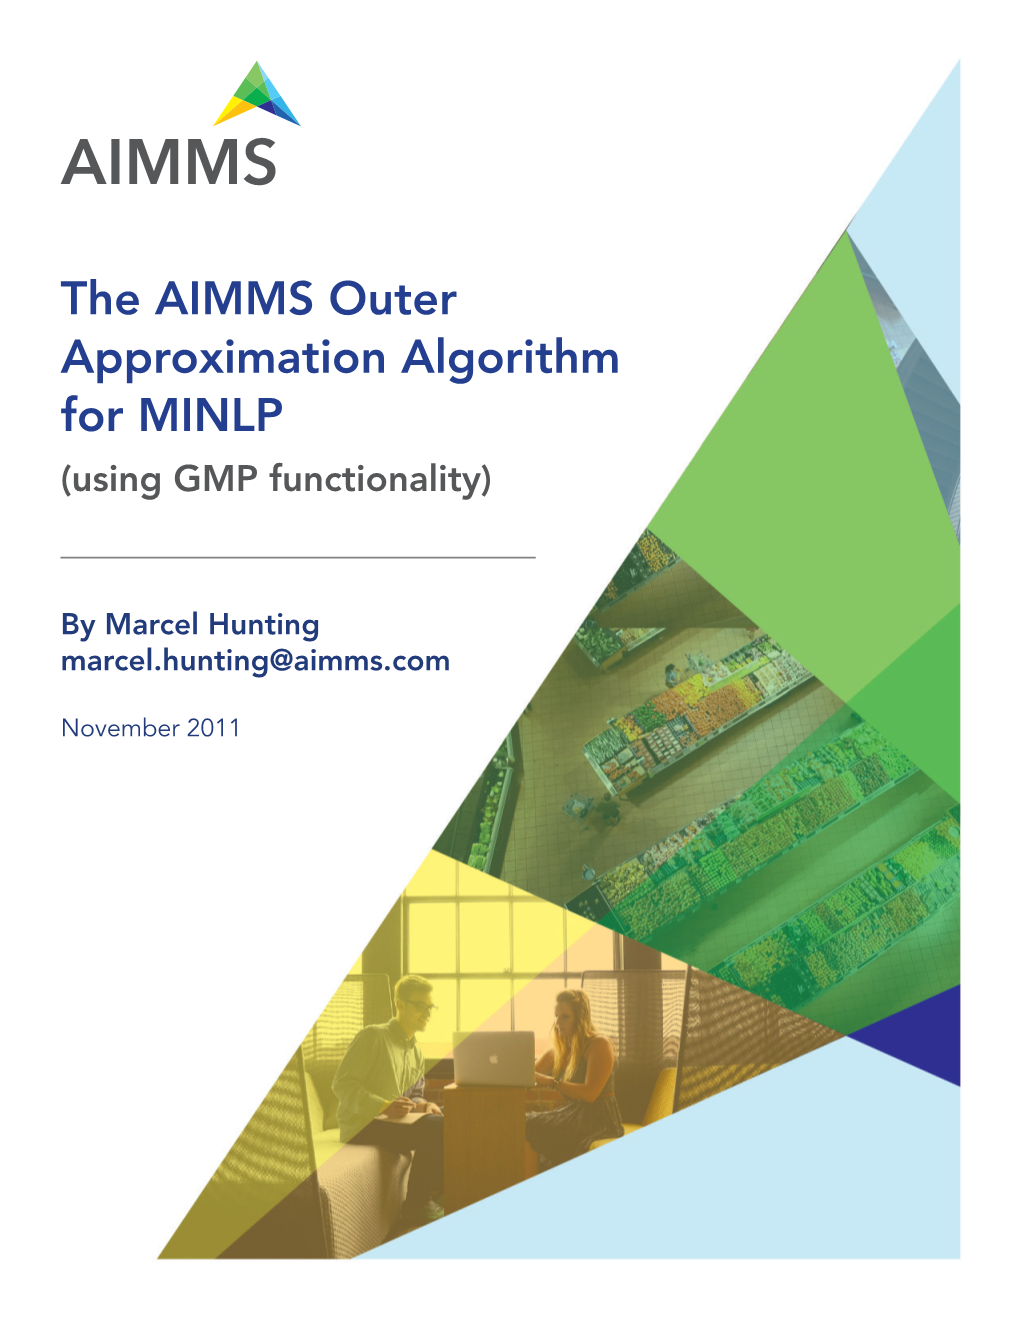 The AIMMS Outer Approximation Algorithm for MINLP (Using GMP Functionality)